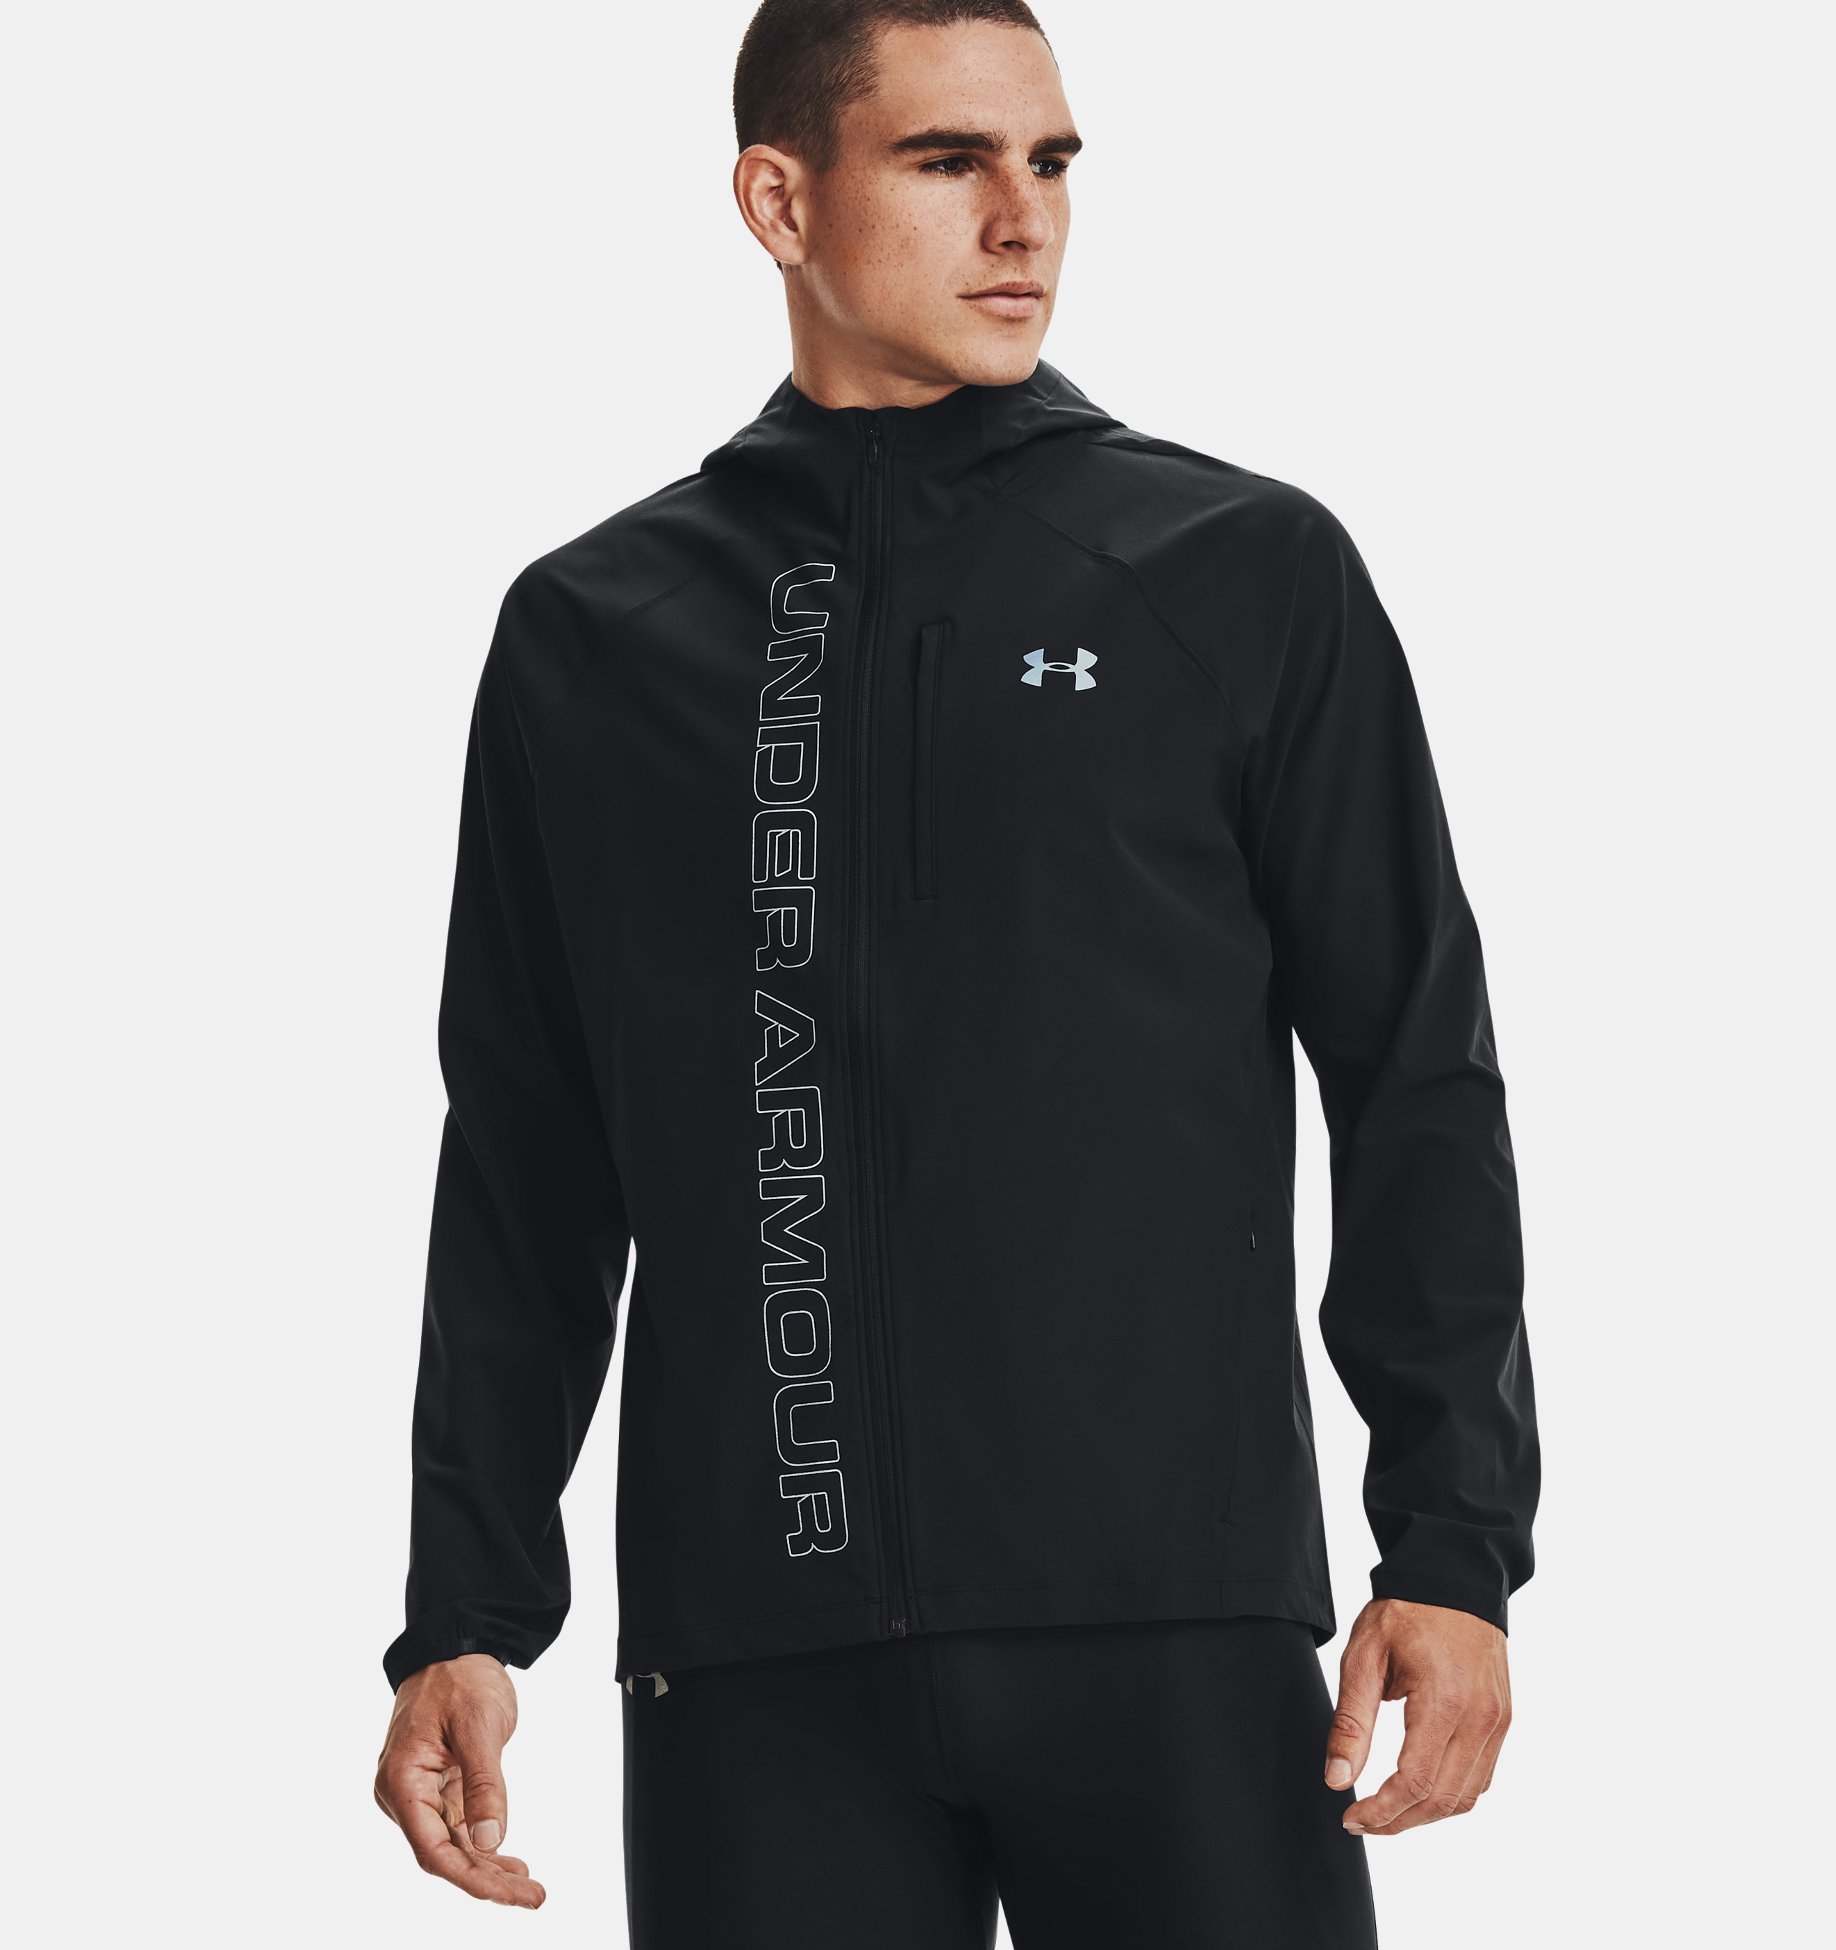 Black XXL Under Armour Qualifier Outrun The Storm Mens Running Jacket 